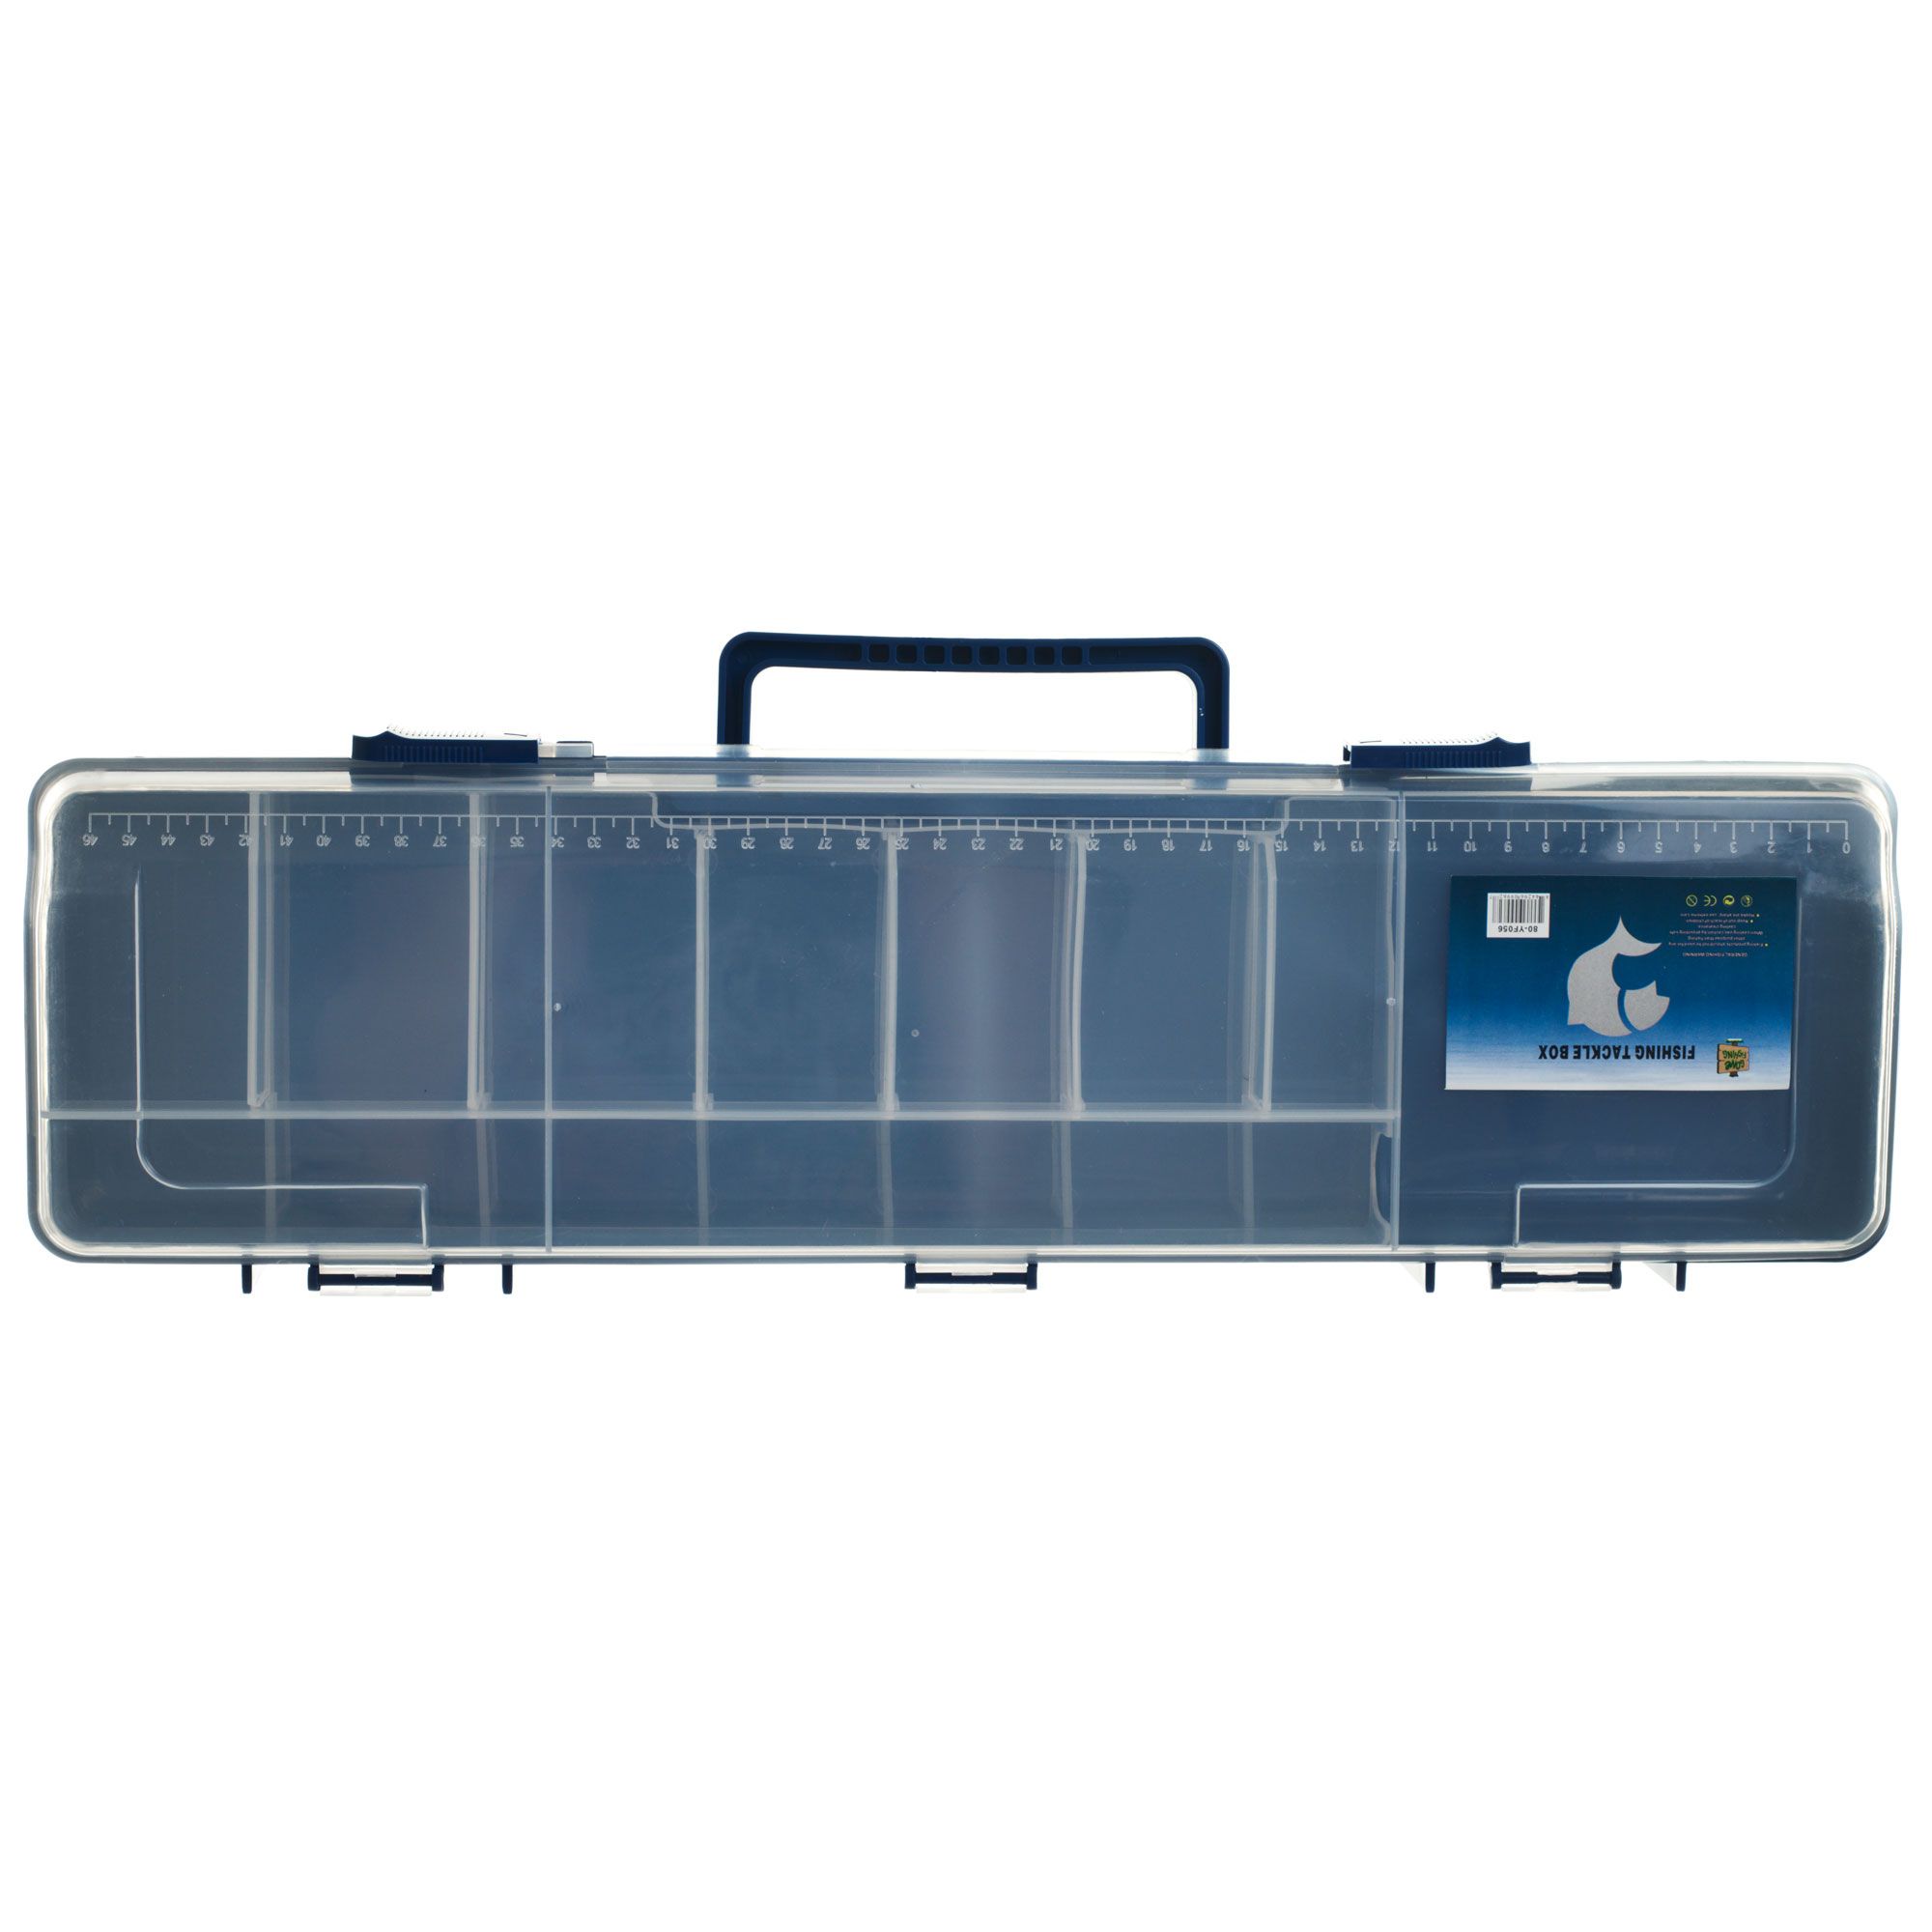 Gone Fishing&trade; Multi-Compartment Fishing Tackle Box